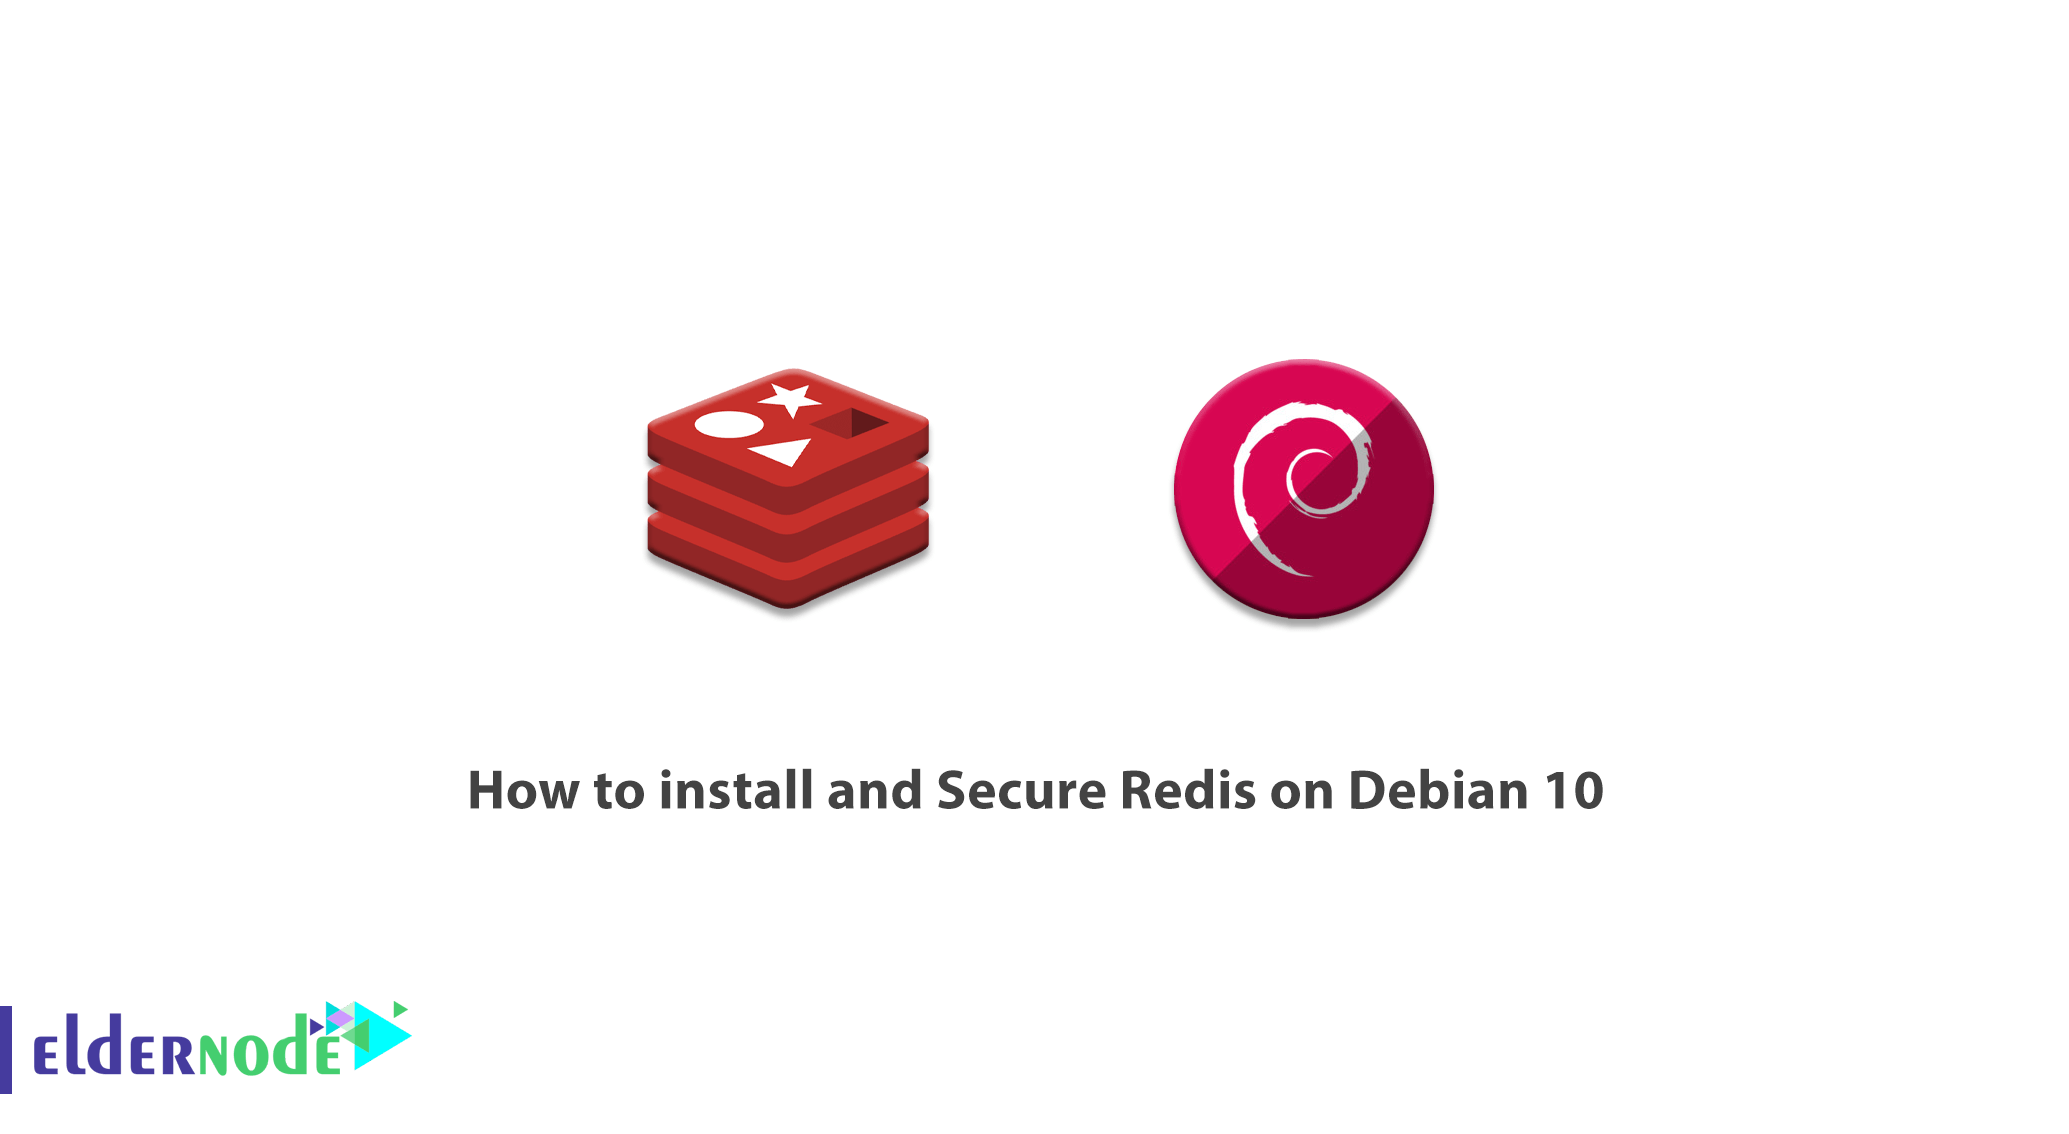 How to install and Secure Redis on Debian 10